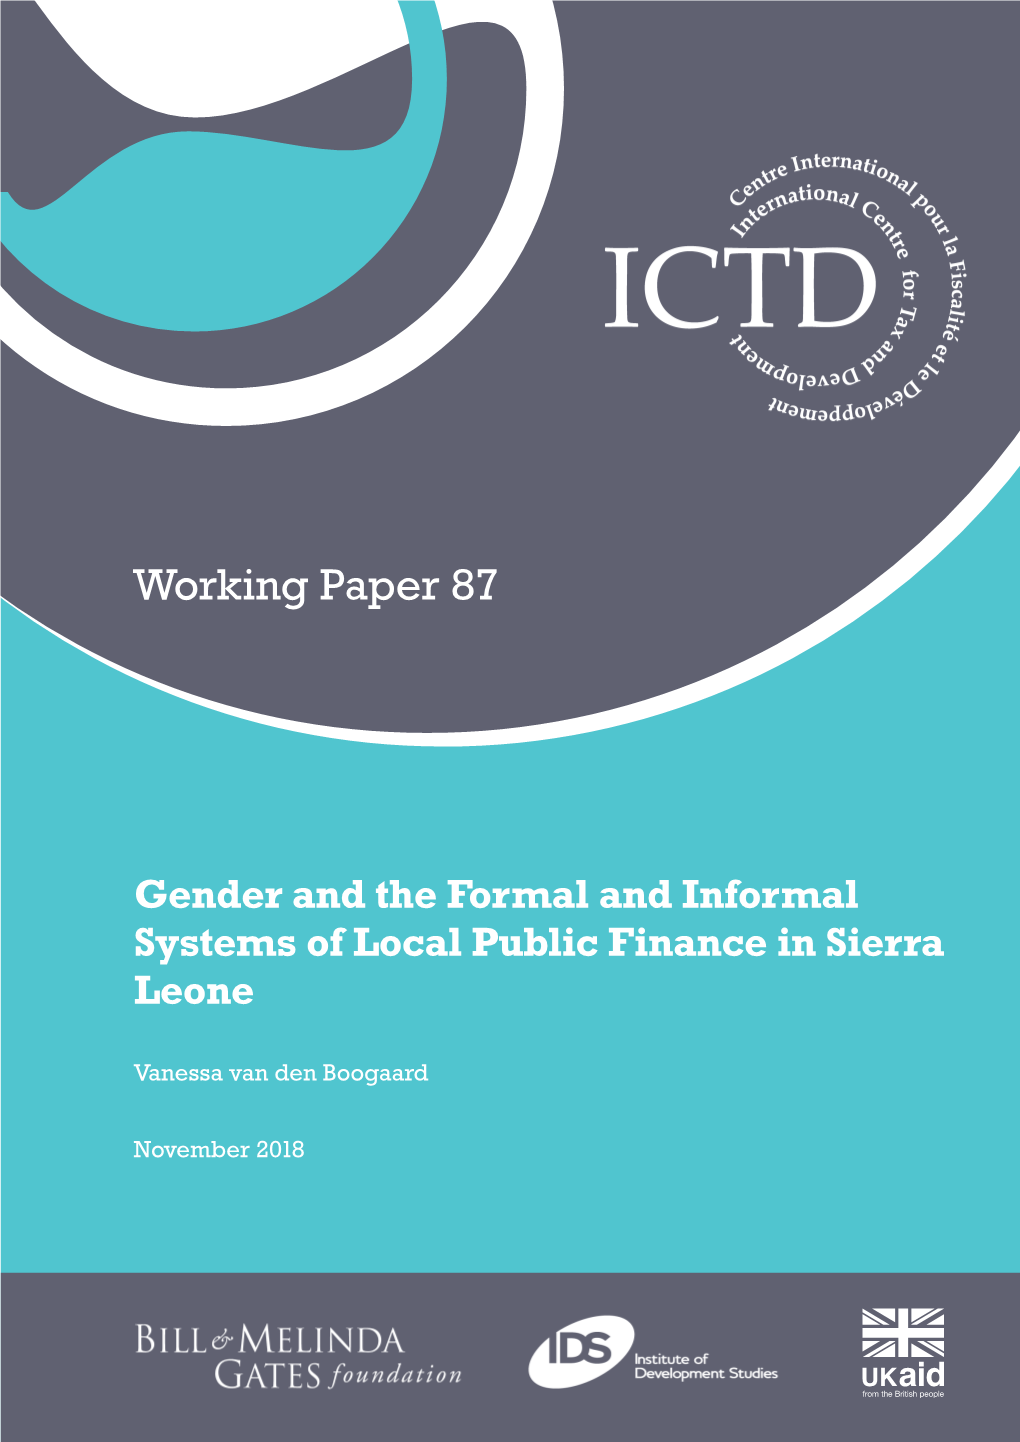 Gender and the Formal and Informal Systems of Local Public Finance in Sierra Leone